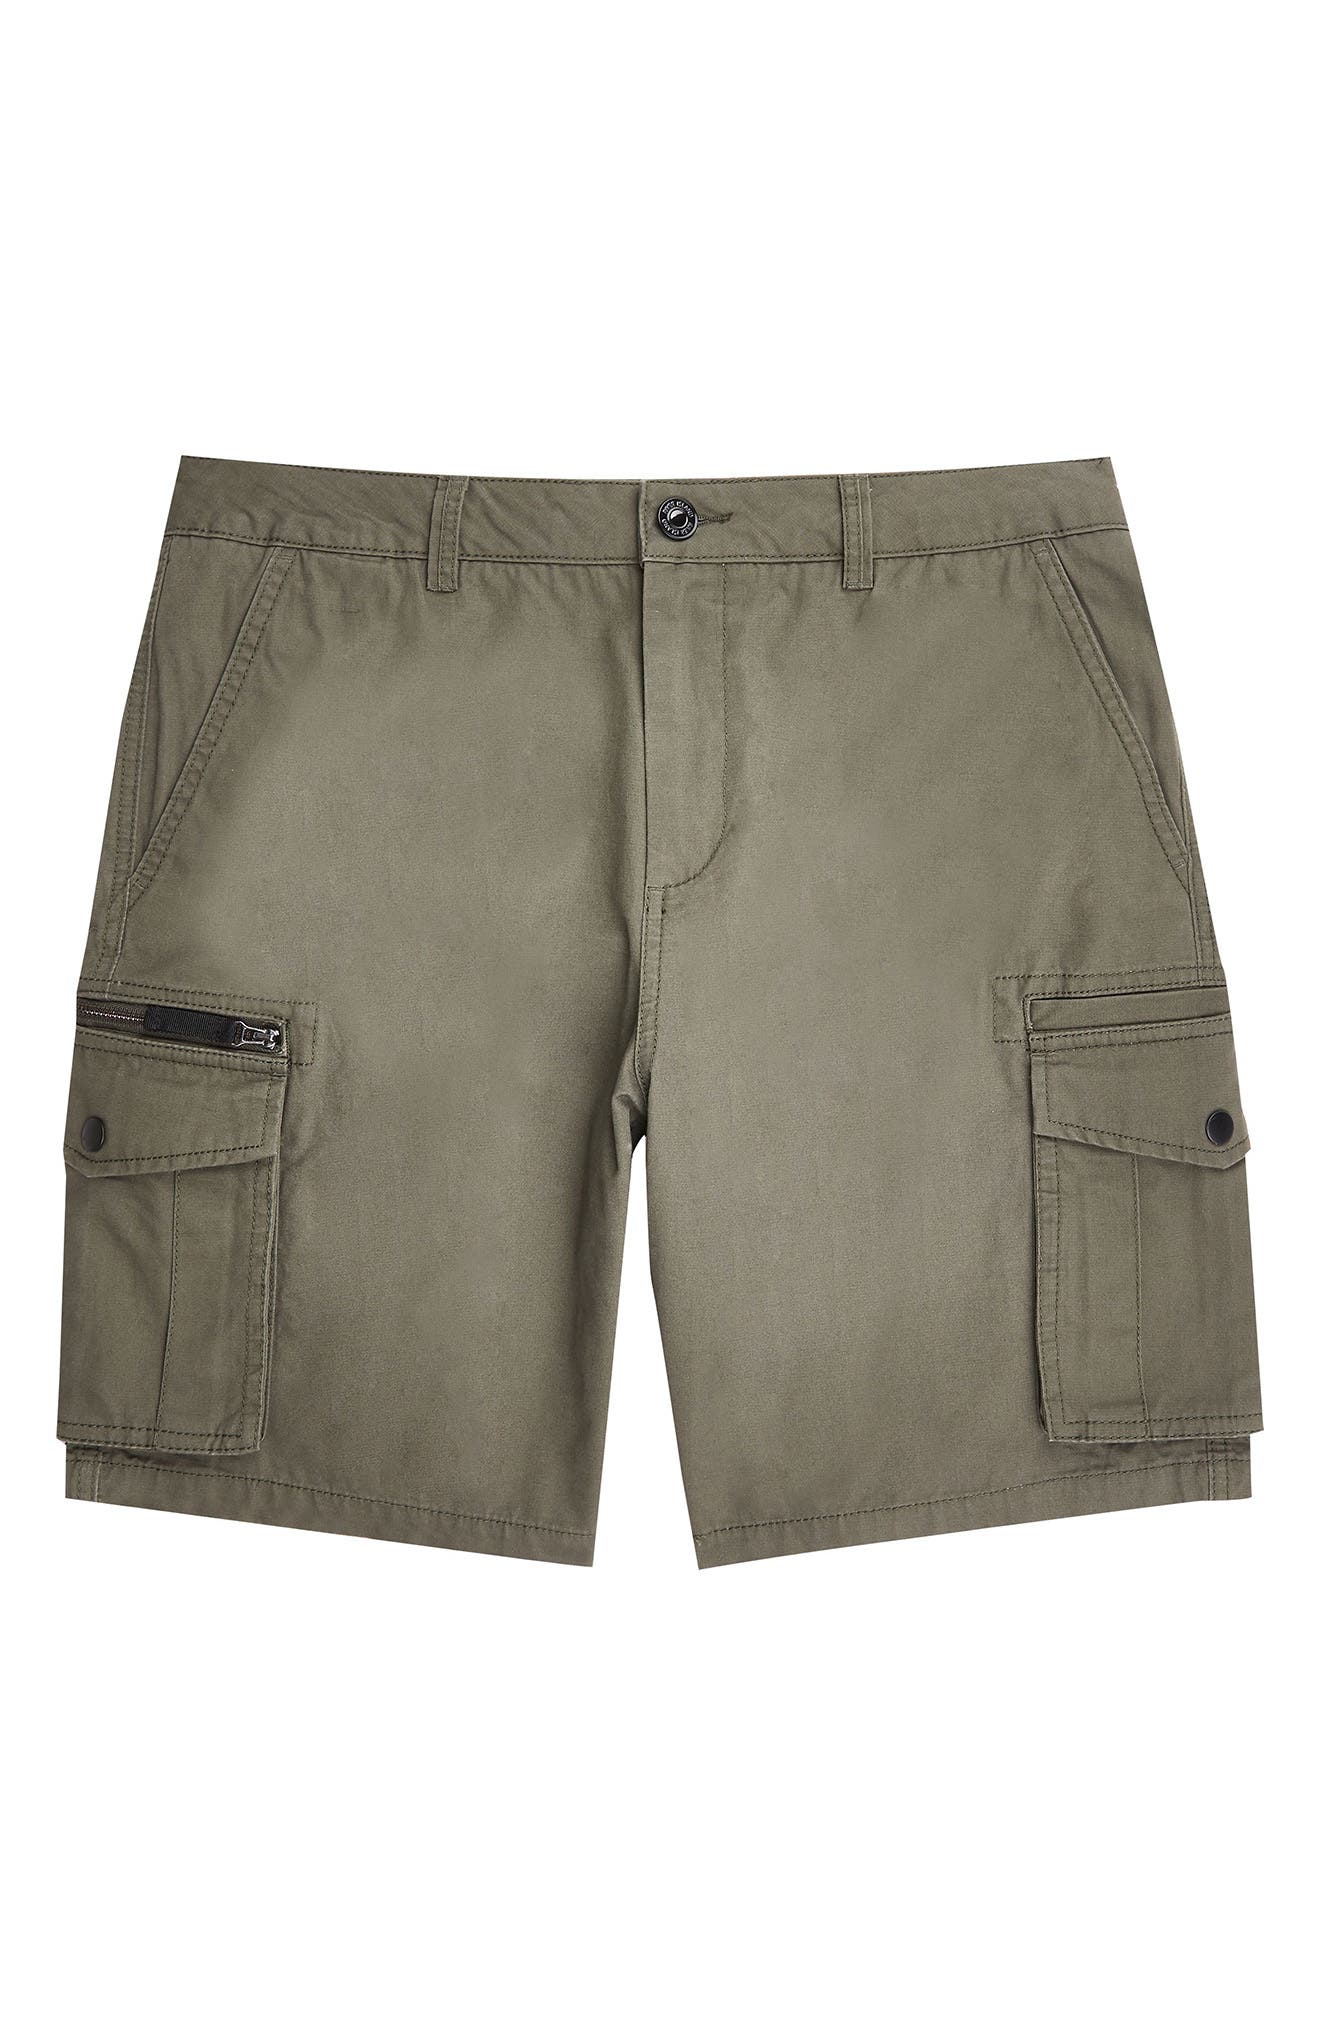 UPC 039703000055 product image for River Island Garment Washed Cargo Shorts in Khaki at Nordstrom, Size 30 | upcitemdb.com